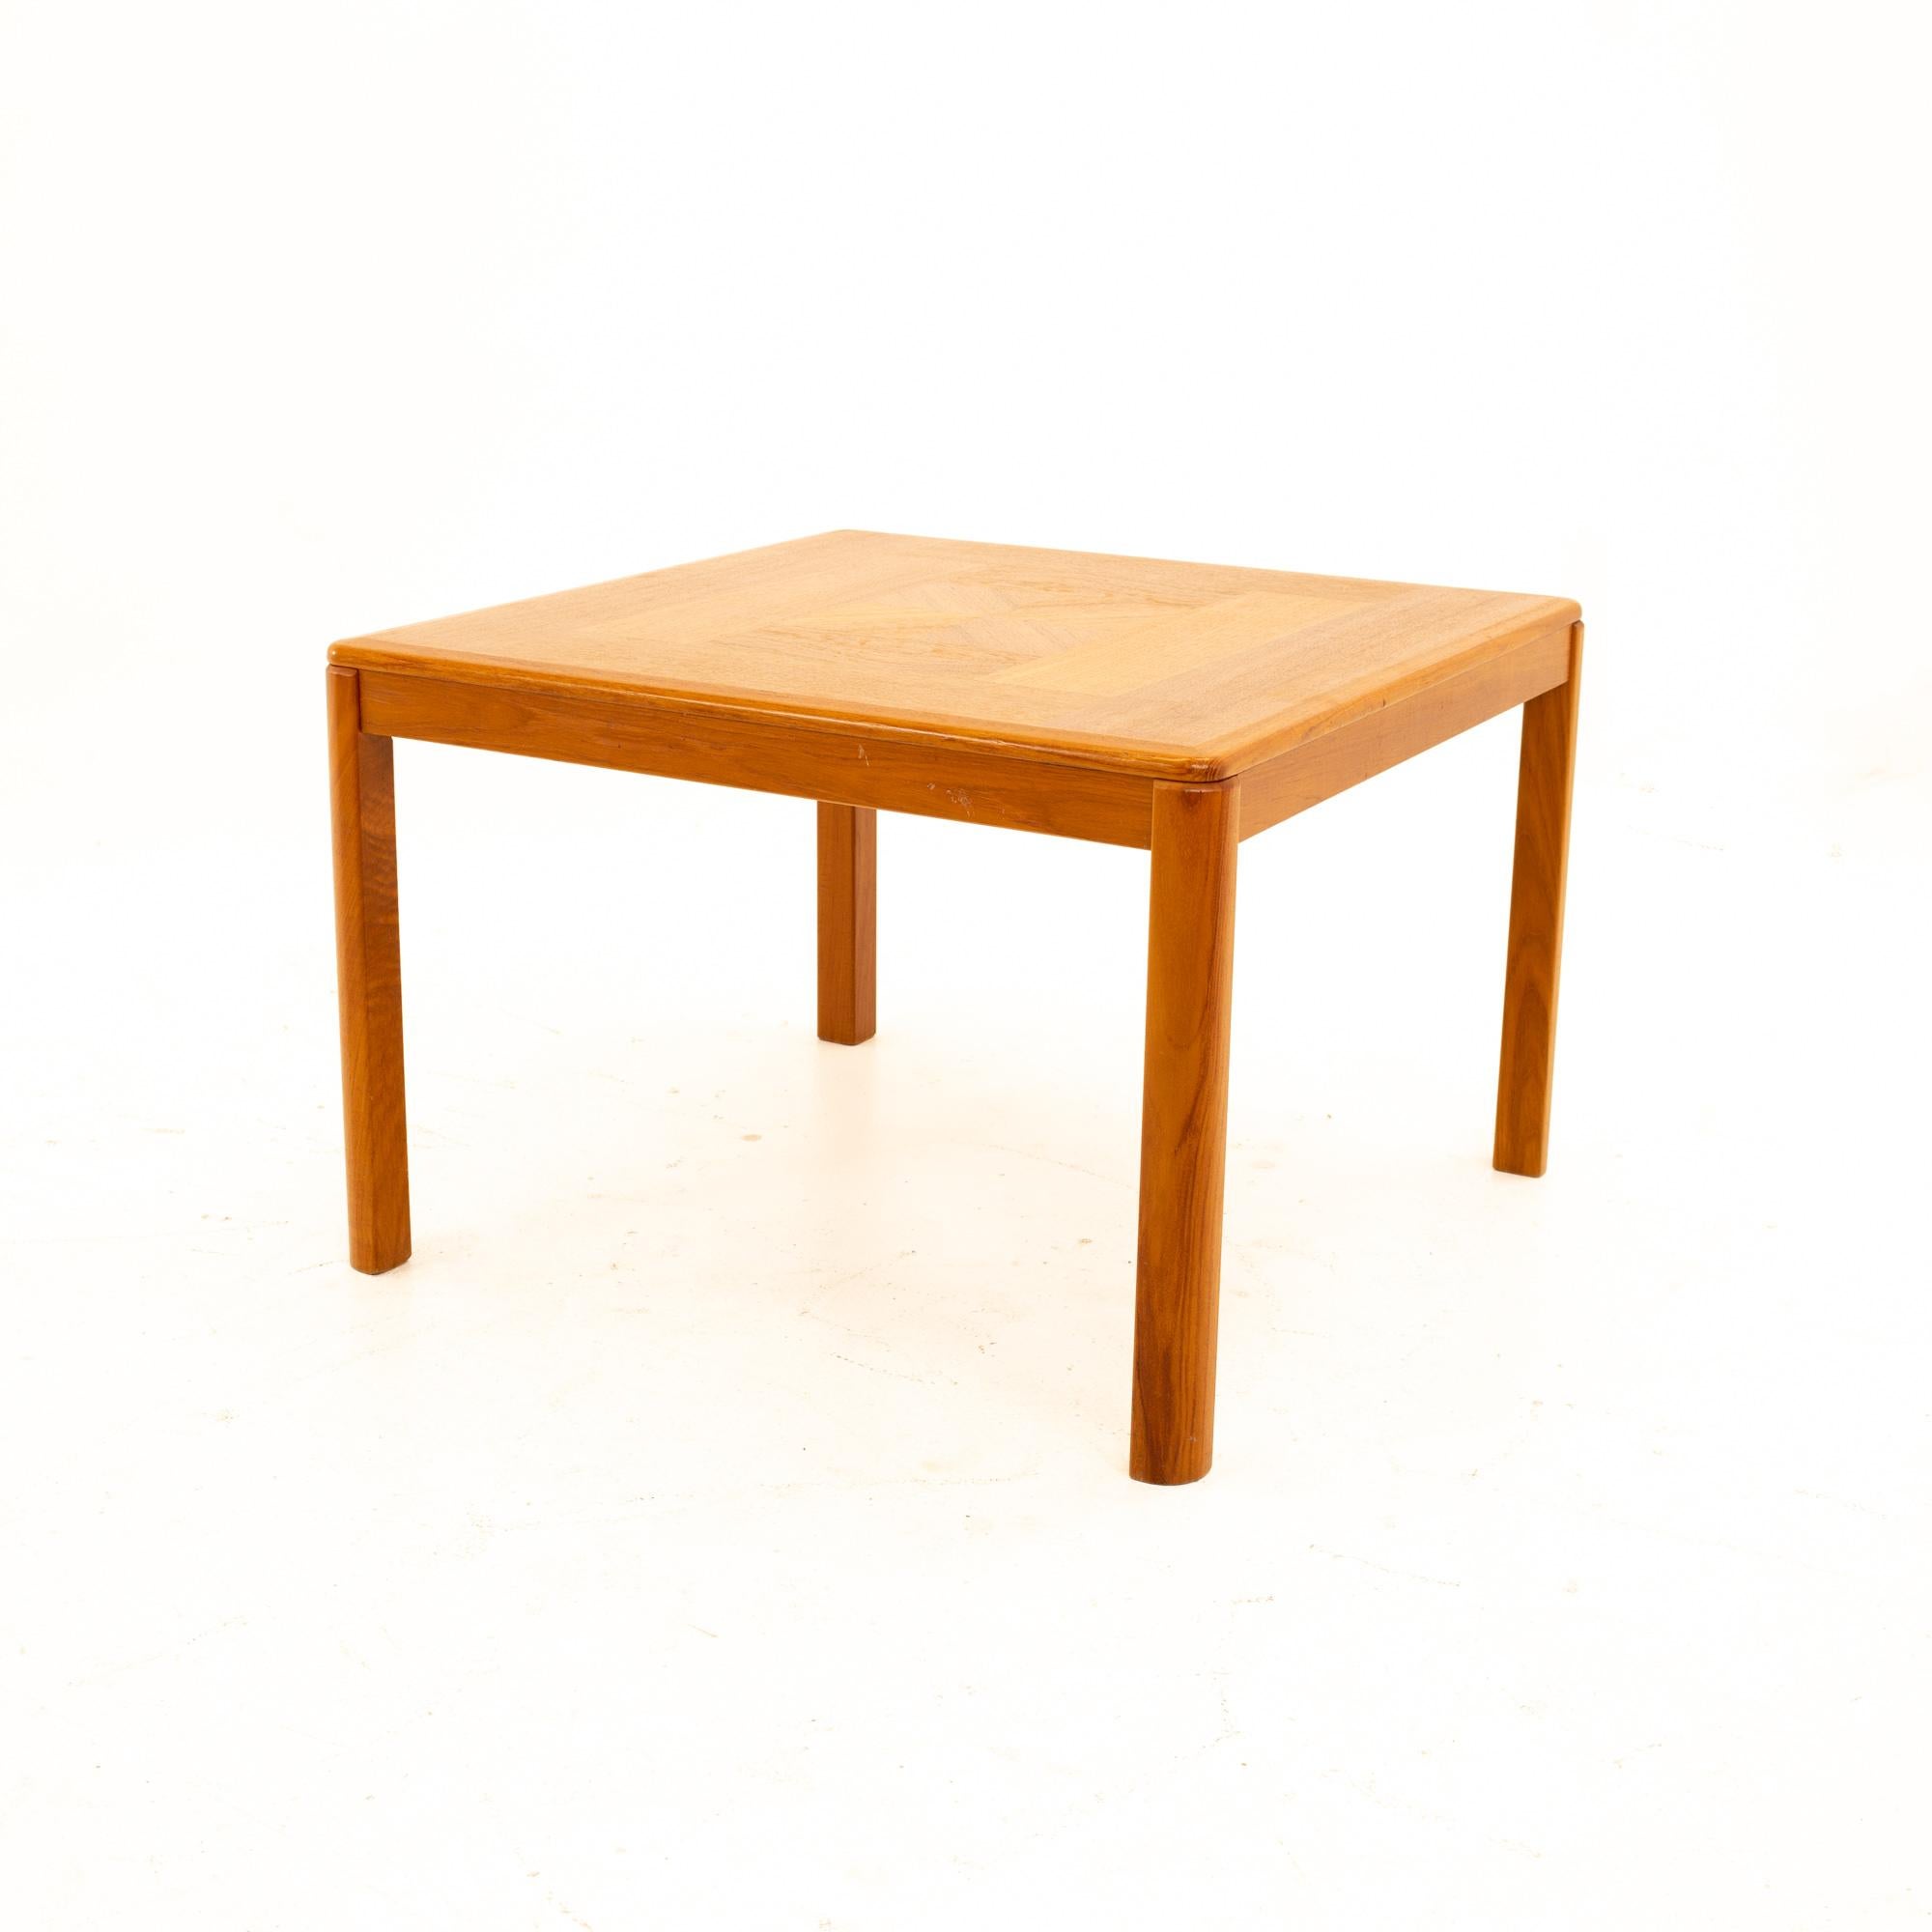 Mid century teak patchwork side end table

End table measures: 28 wide x 28 deep x 18.5 inches high

All pieces of furniture can be had in what we call restored vintage condition. That means the piece is restored upon purchase so it’s free of